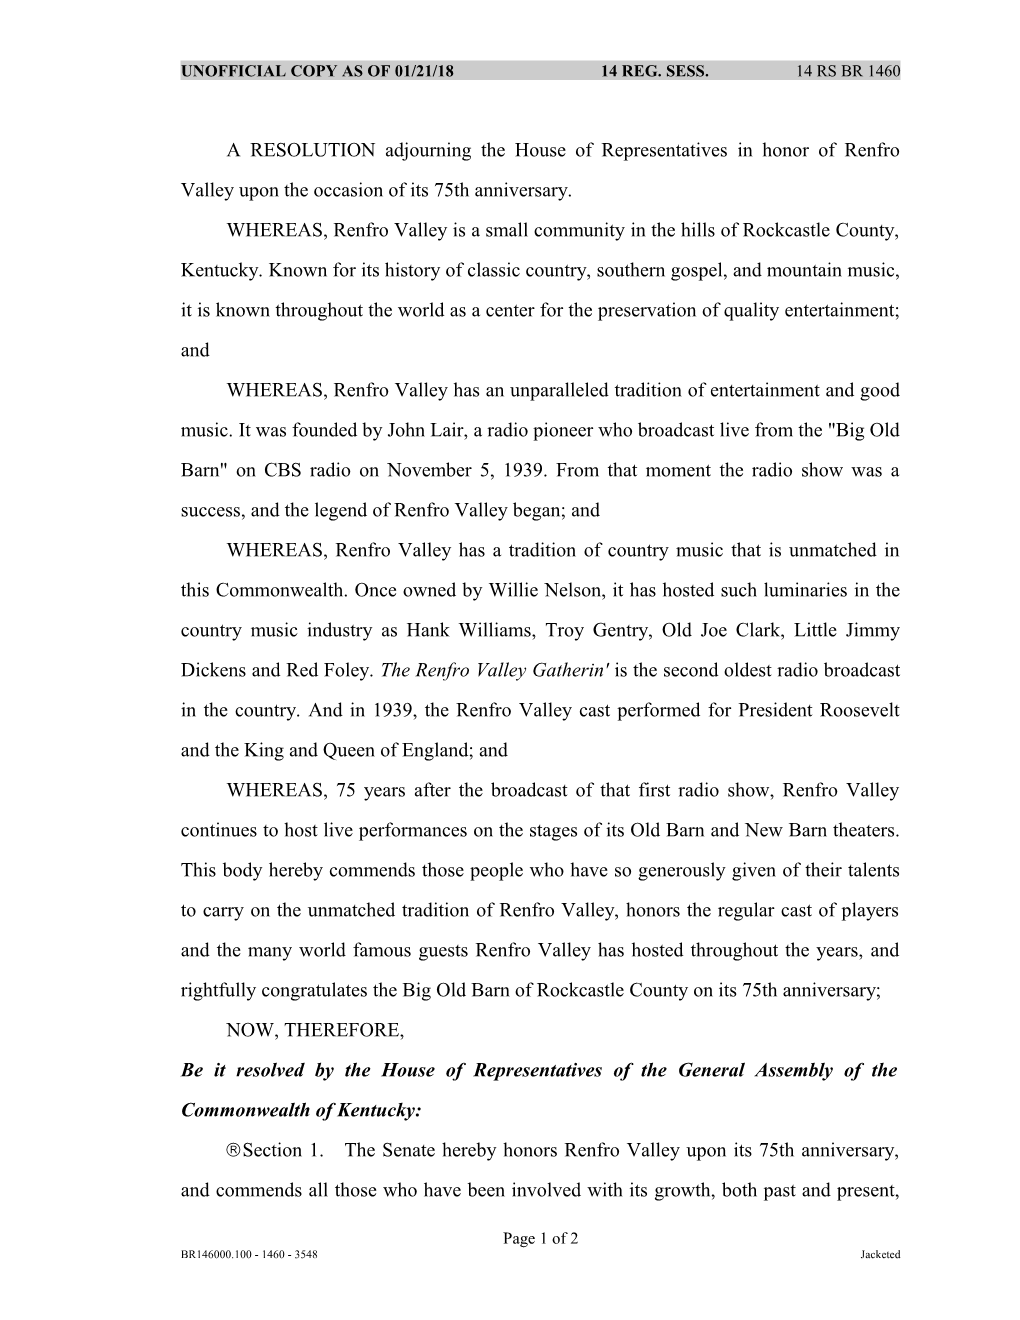 A RESOLUTION Adjourning the House of Representatives in Honor of Renfro Valley Upon The